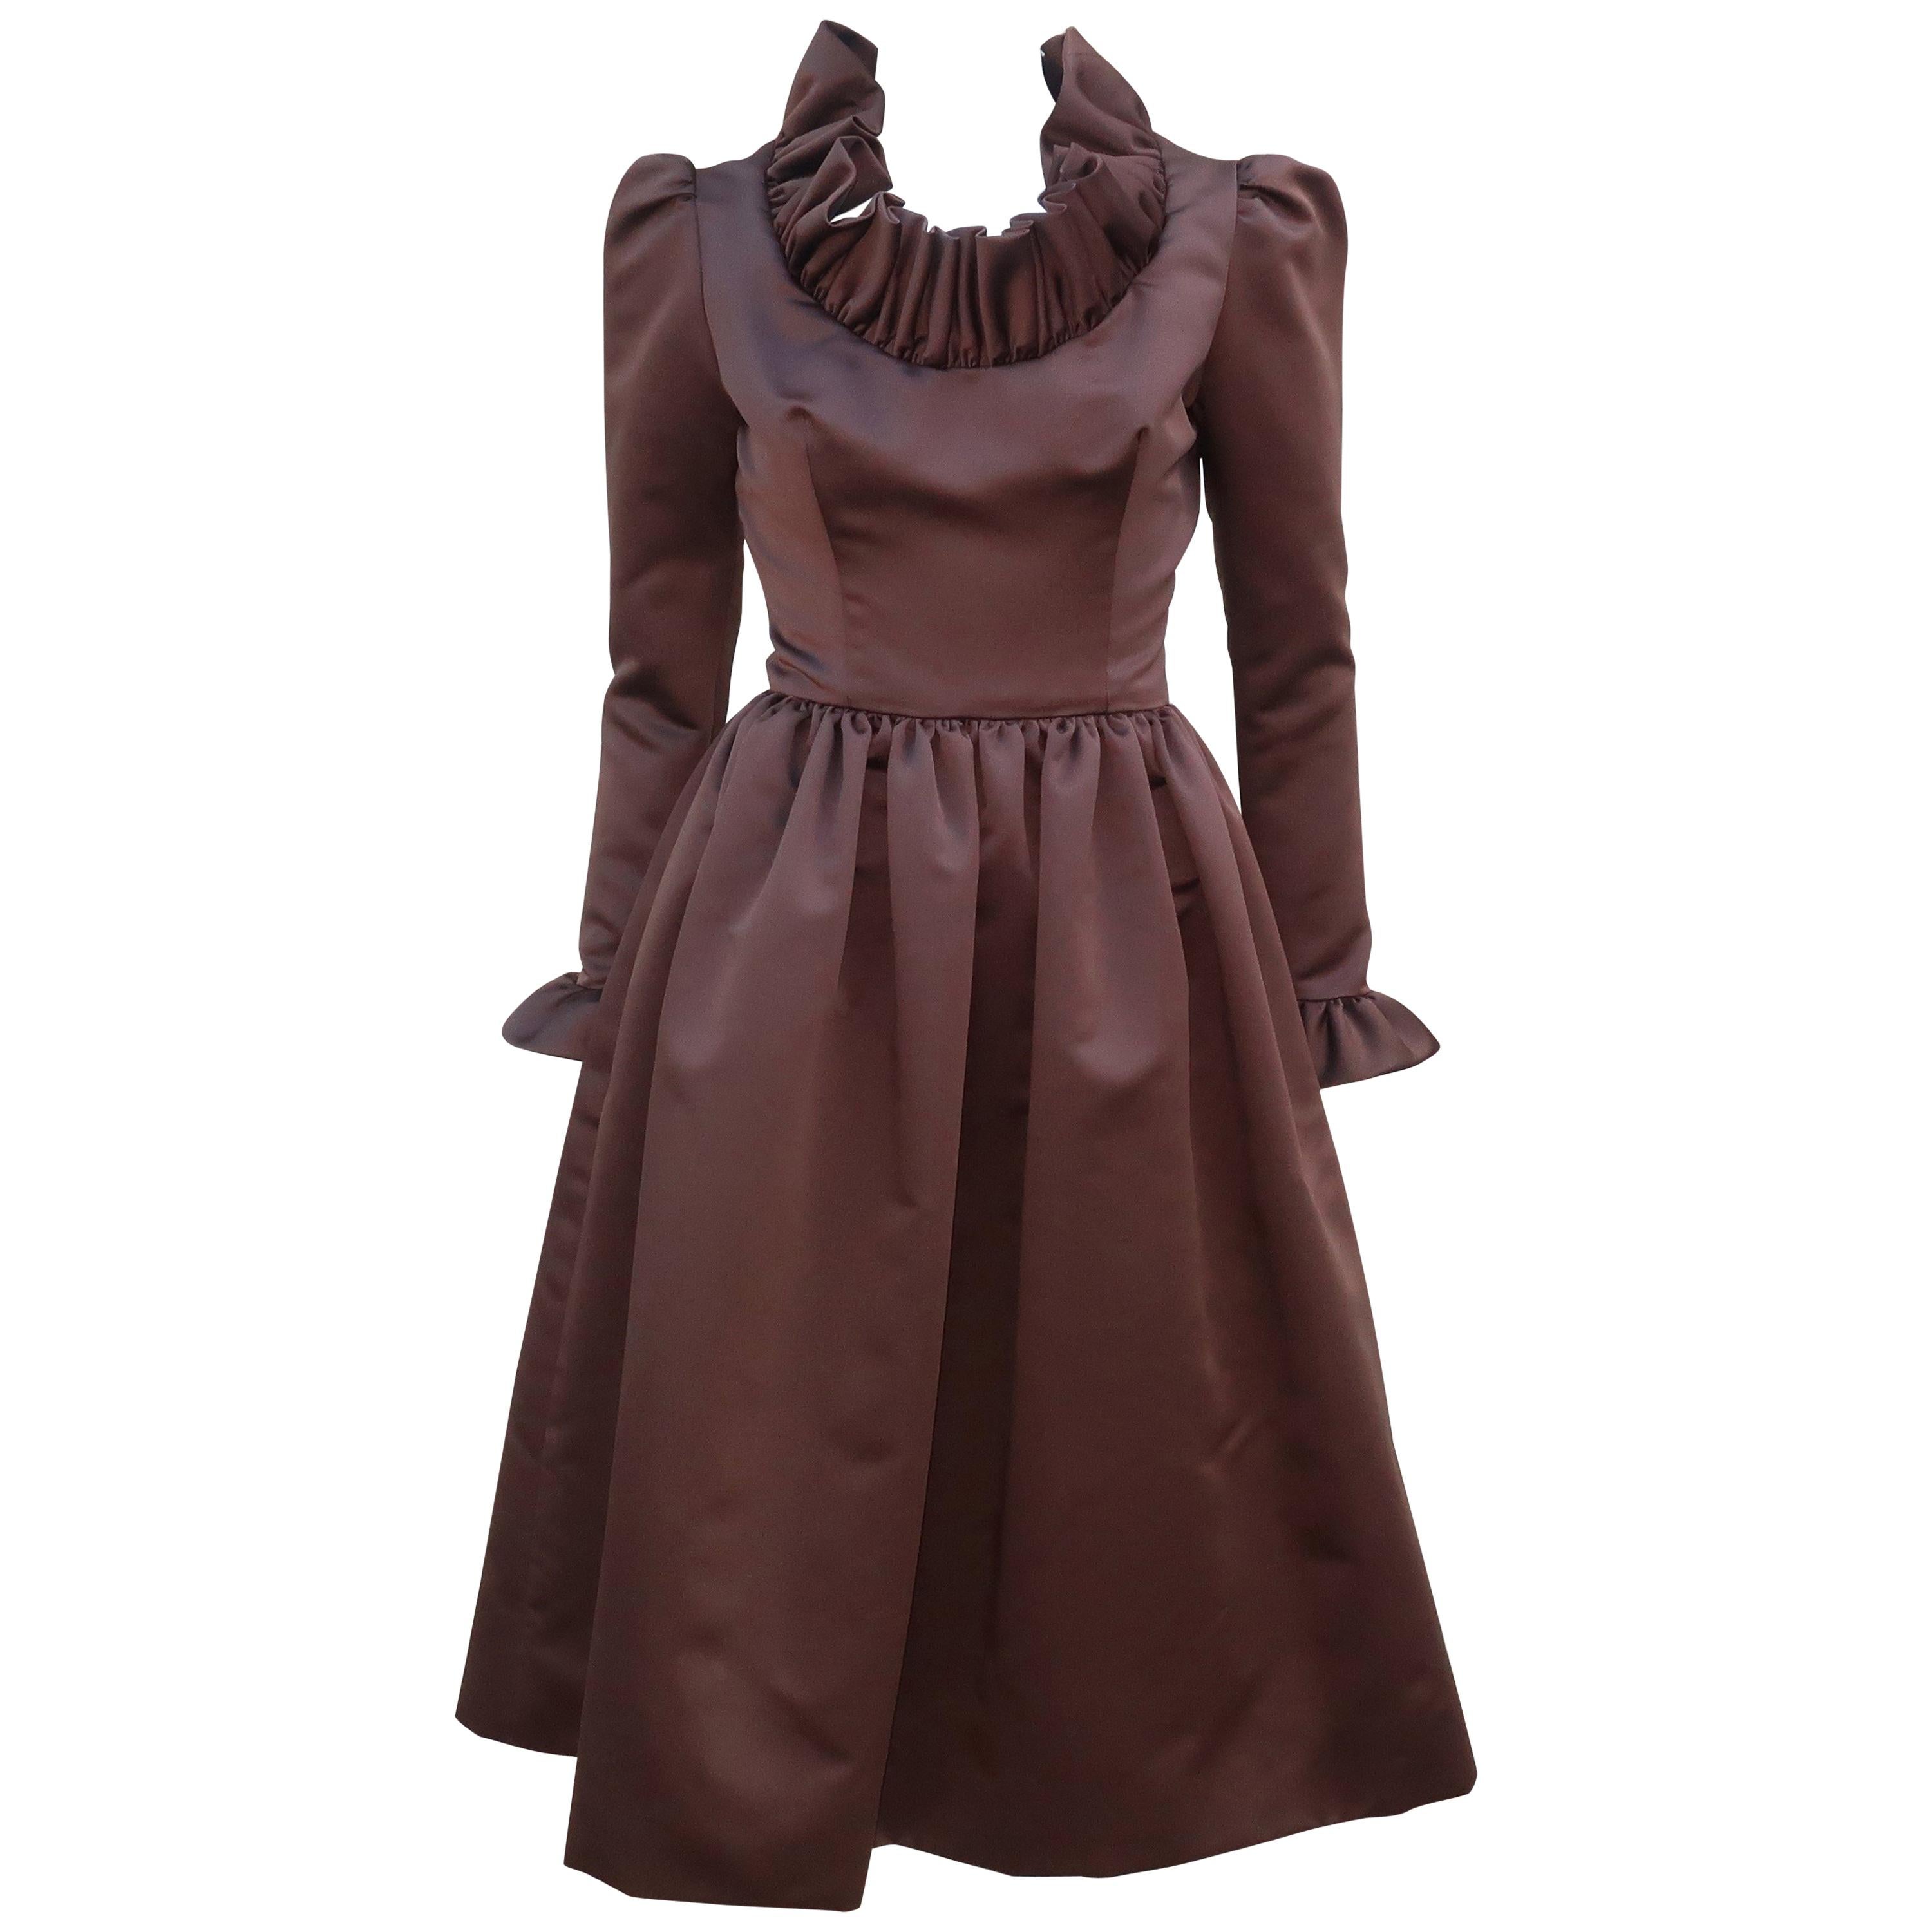 Jill Richards Brown Satin Ruffled Cocktail Dress, 1970's For Sale